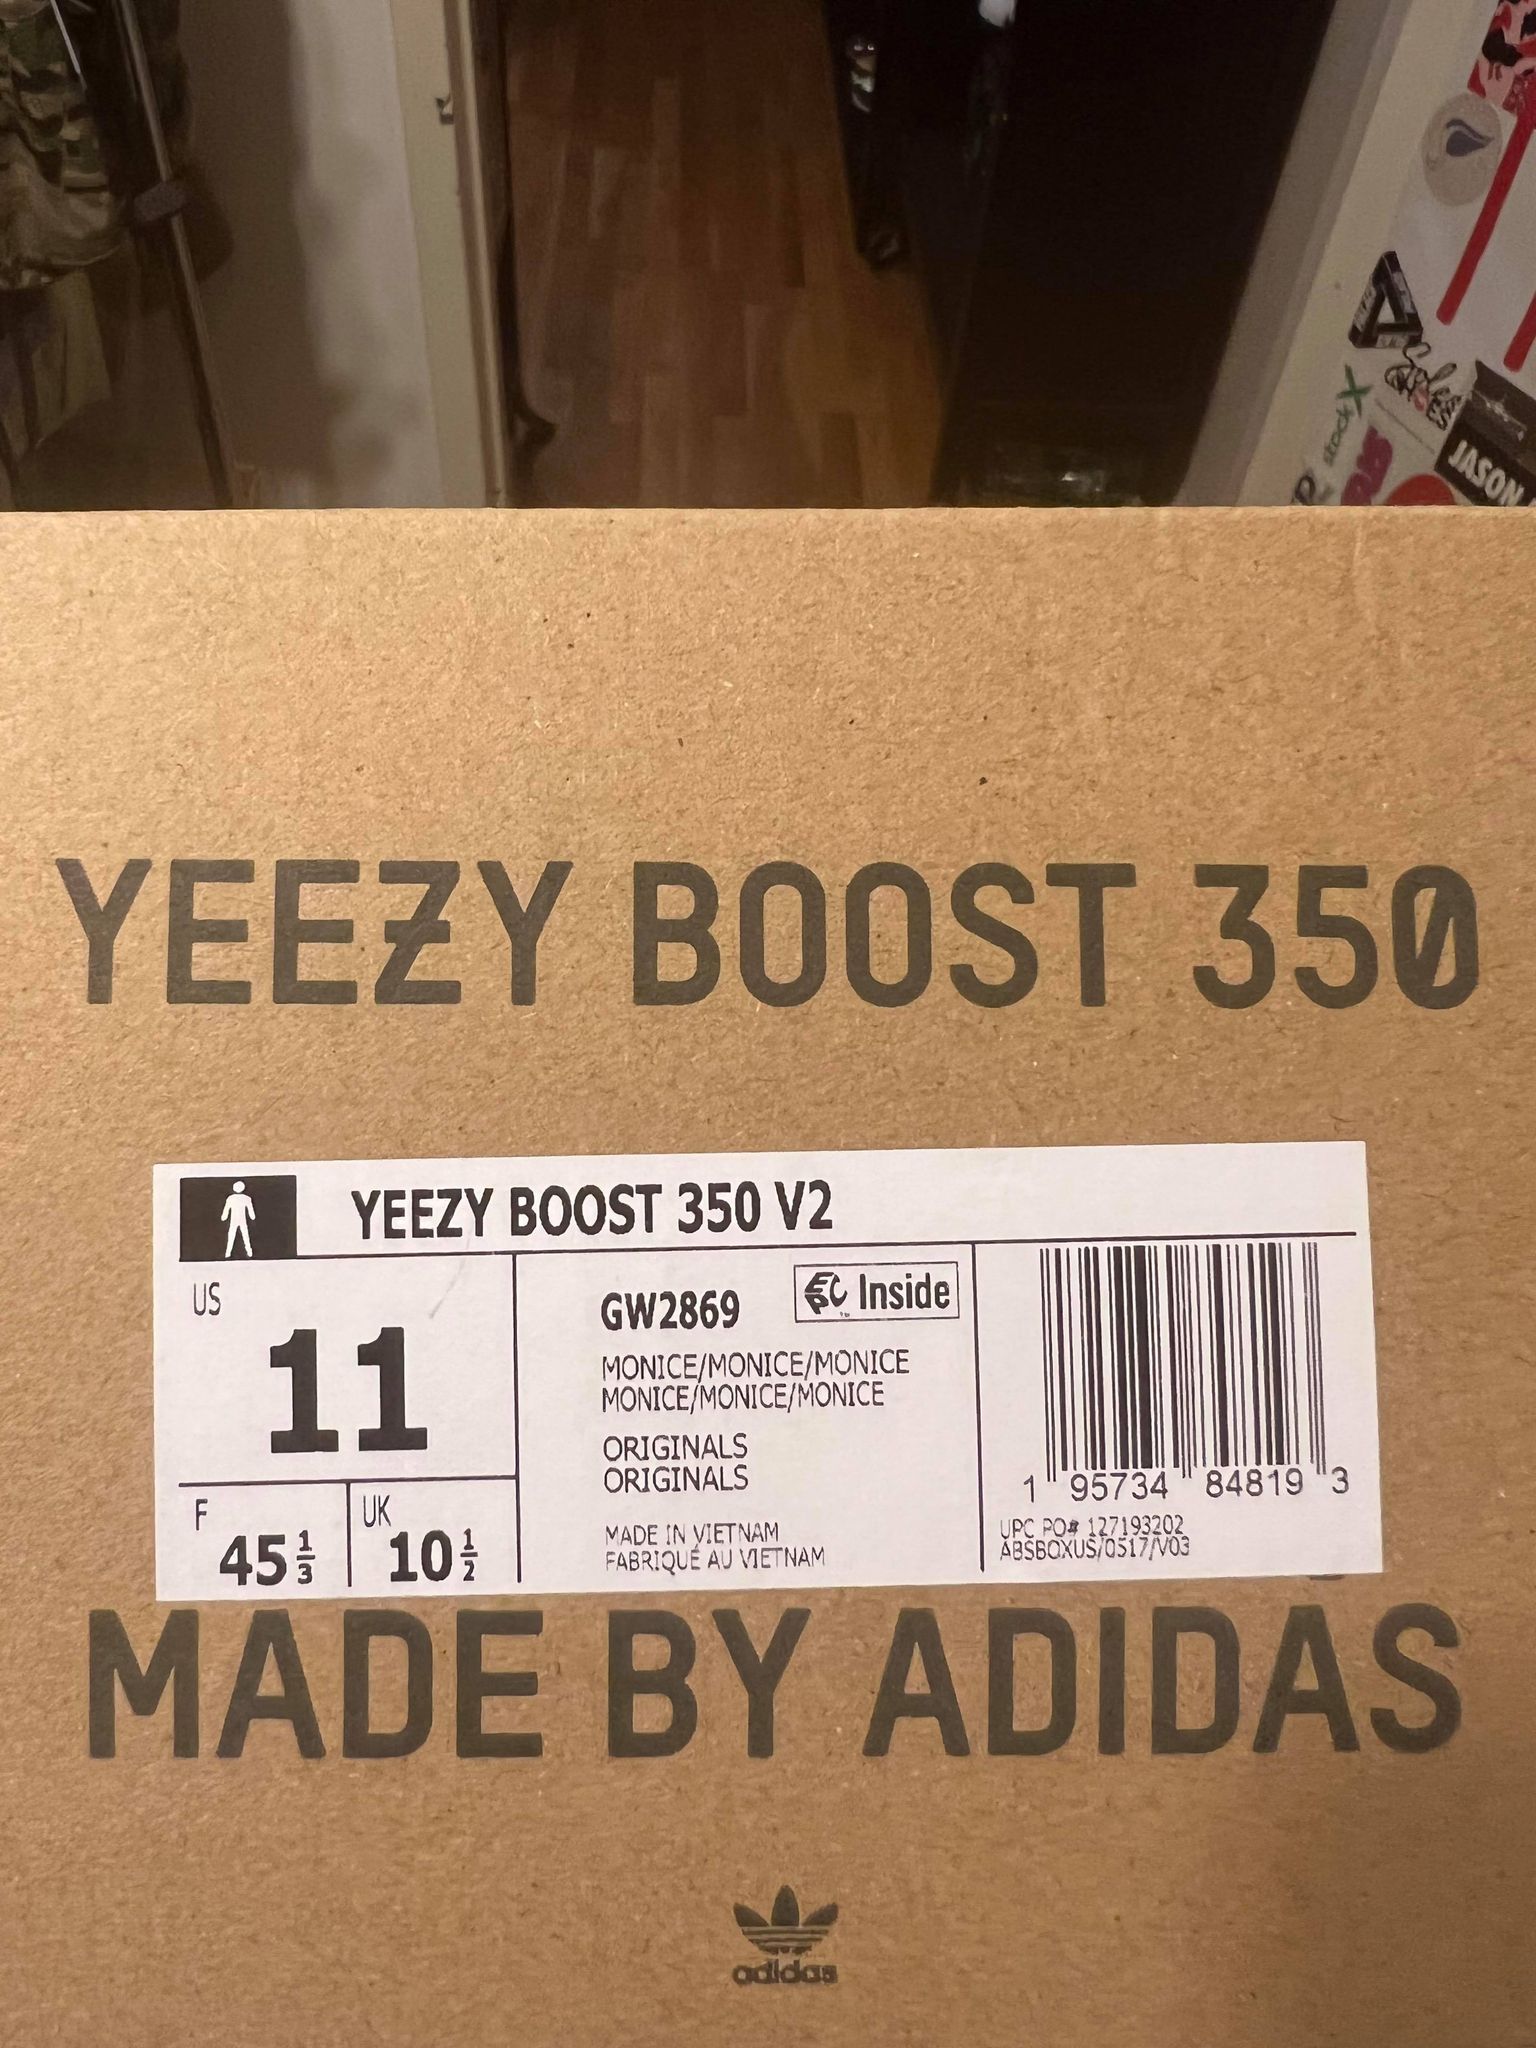 2021 Adidas Yeezy Boost V2 Ice Box Only - Jwong Boutique